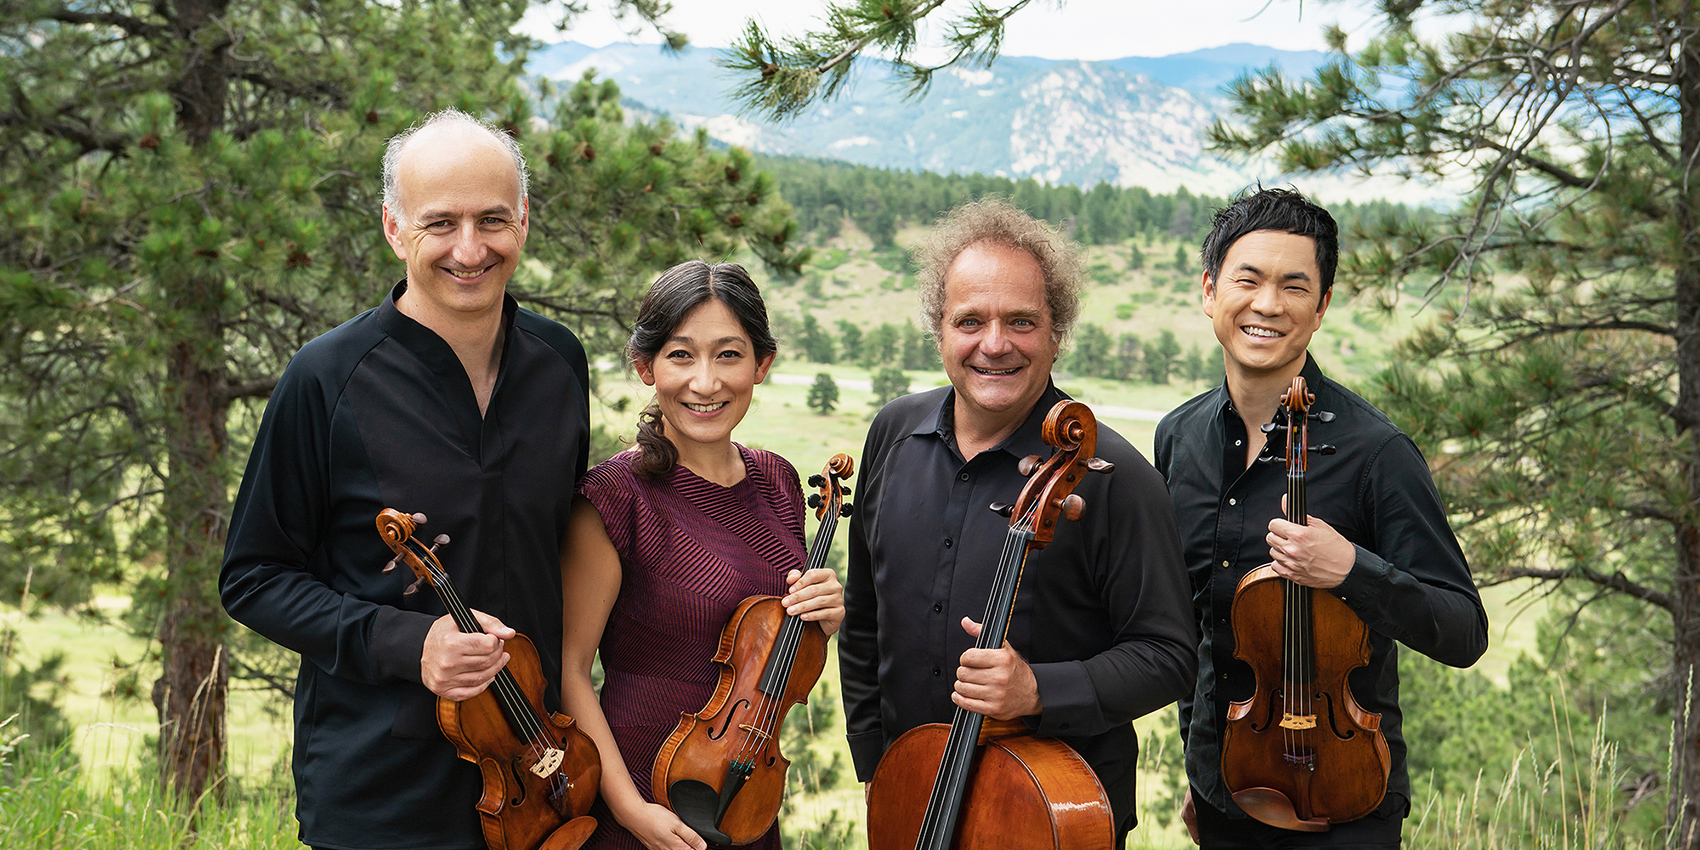 Four musicians standing, holding instruments outside. Trees and mountains in the background